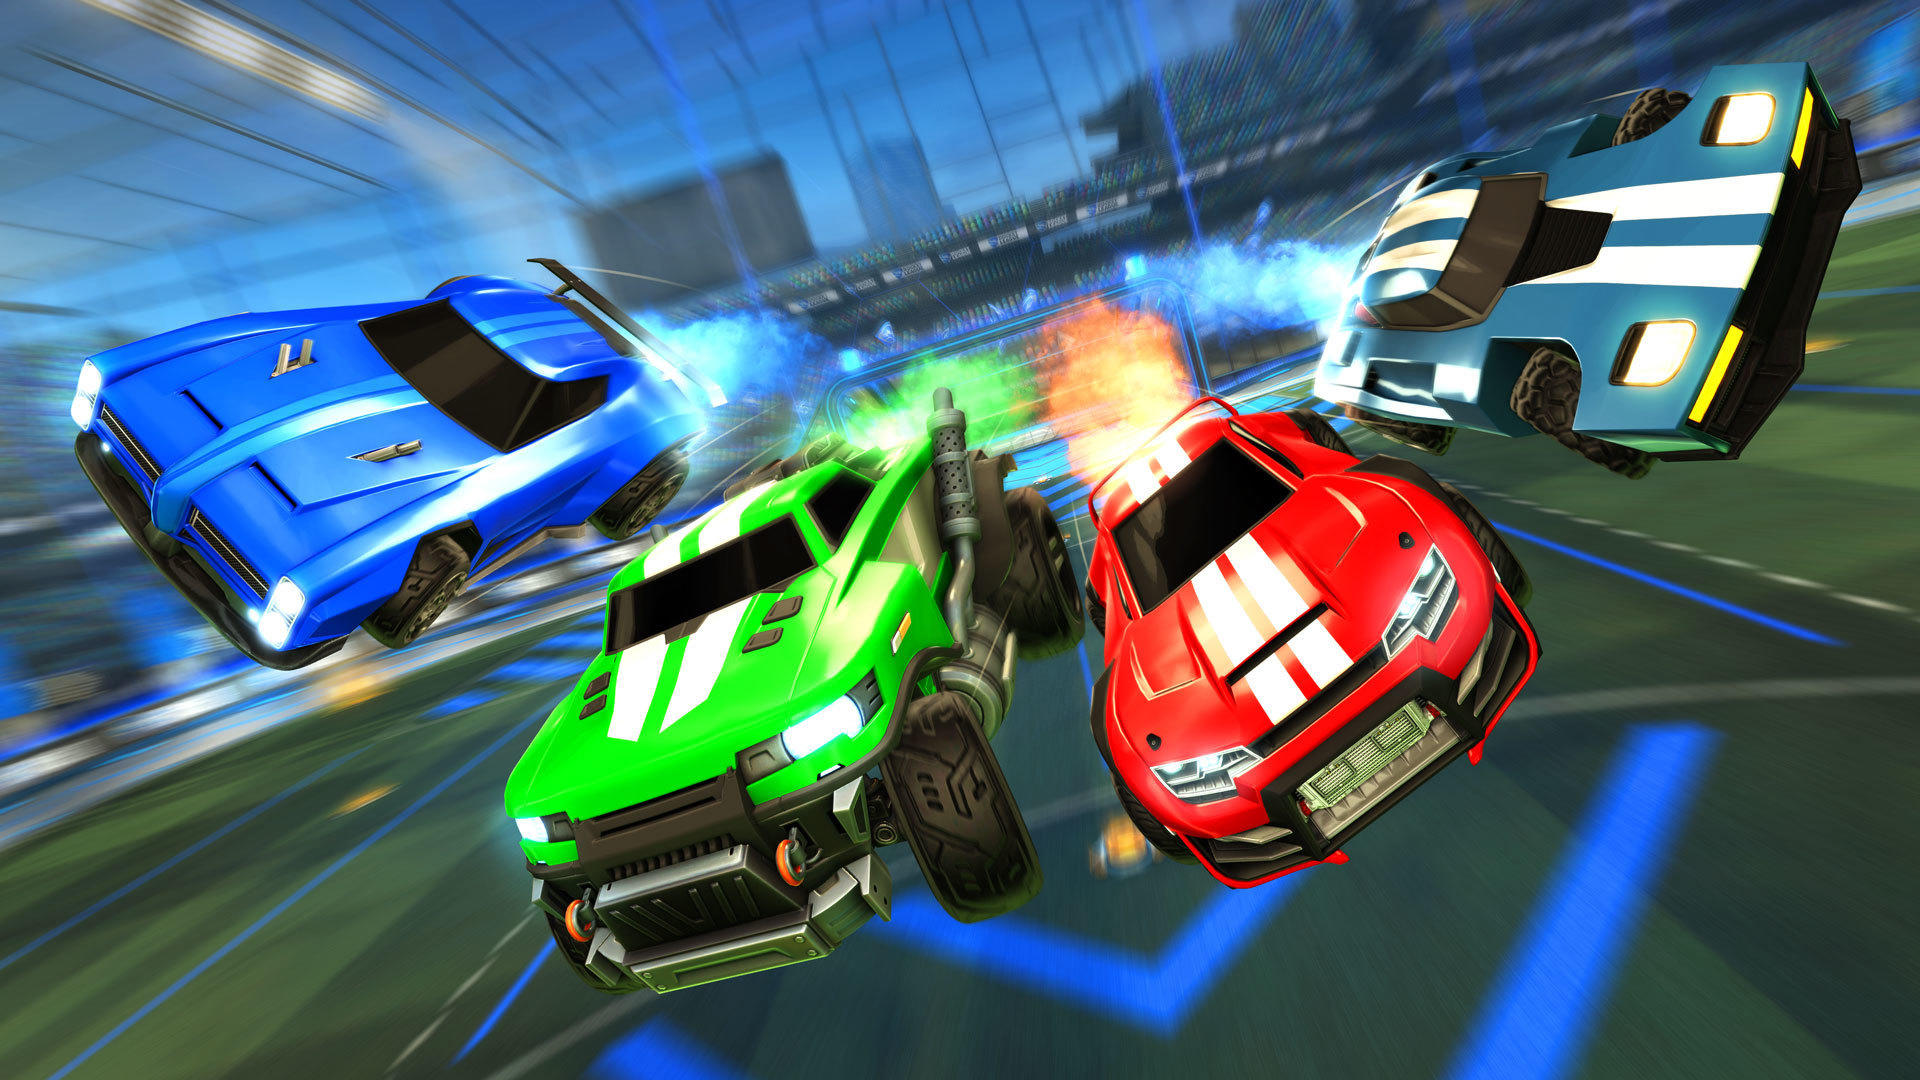 Rocket League Is Taking Their First Steps Towards A Future Without Loot Boxes, Developers Are Removing Paid Crates Later This Year